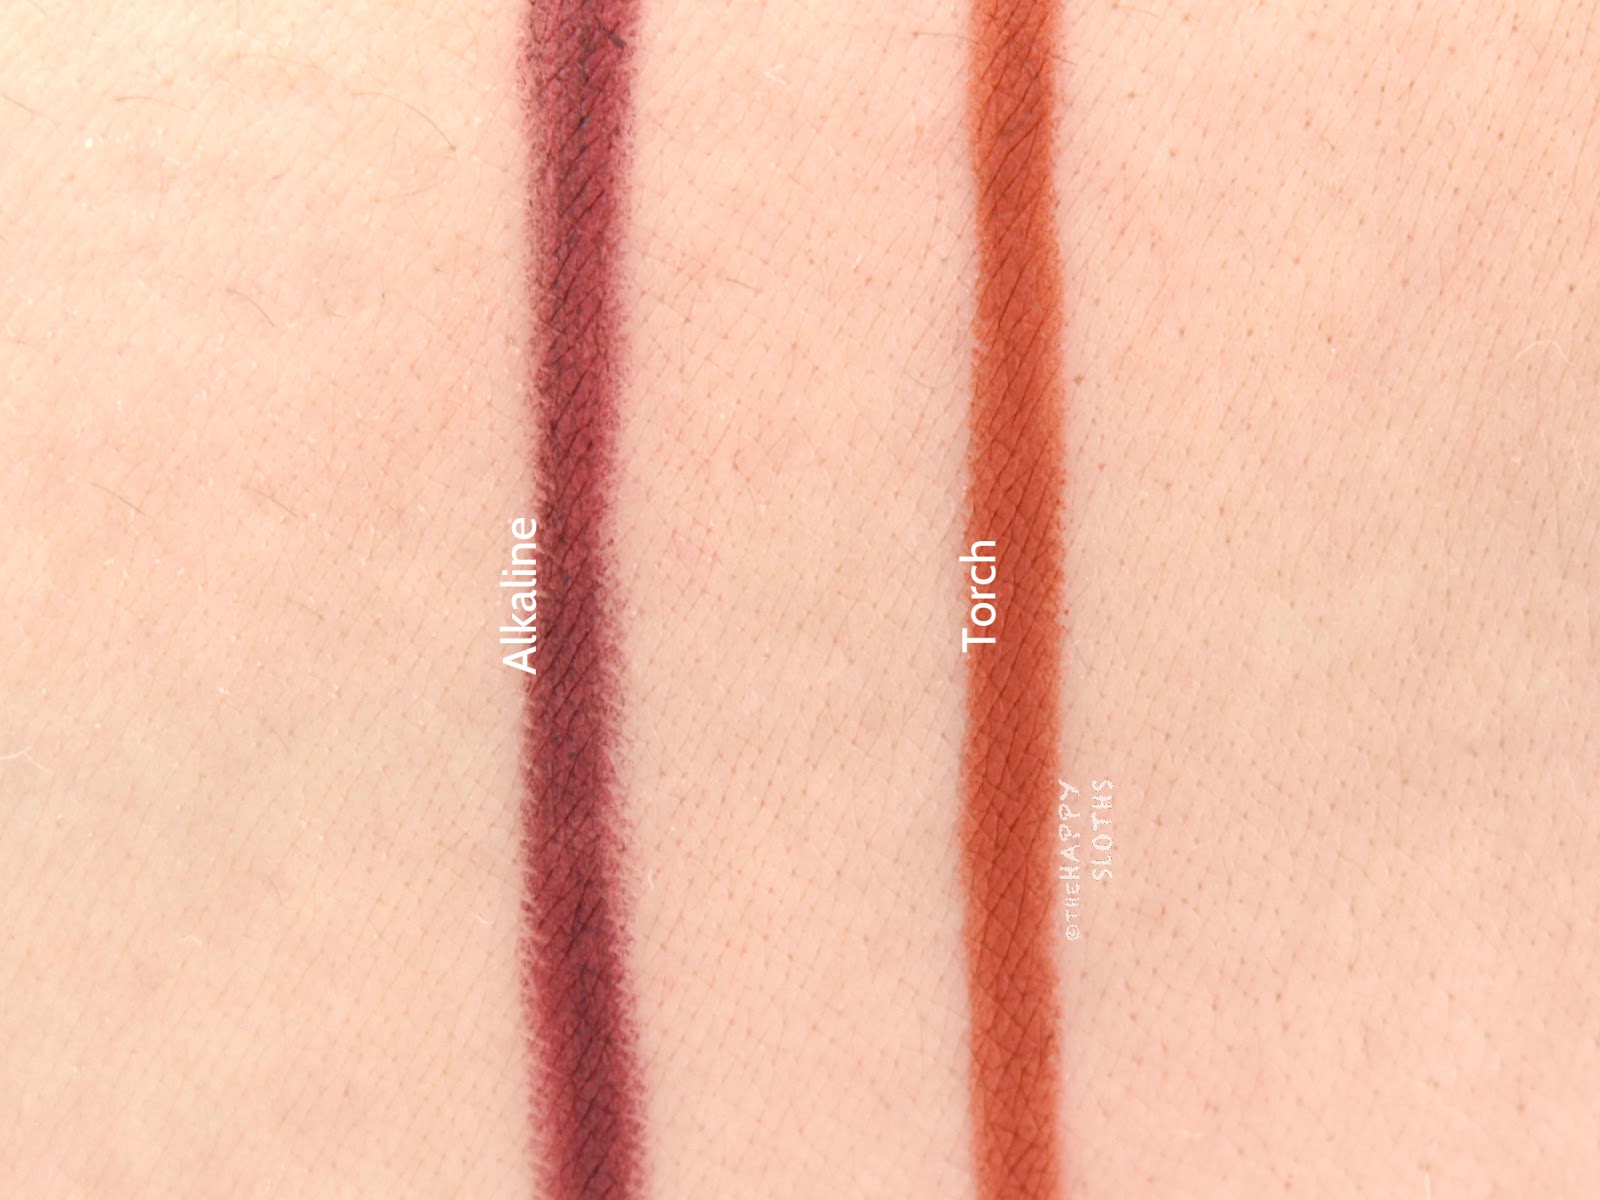 Urban Decay Naked Heat 24/7 Glide-On Eye Pencil in "Alkaline" & "Torch": Review and Swatches